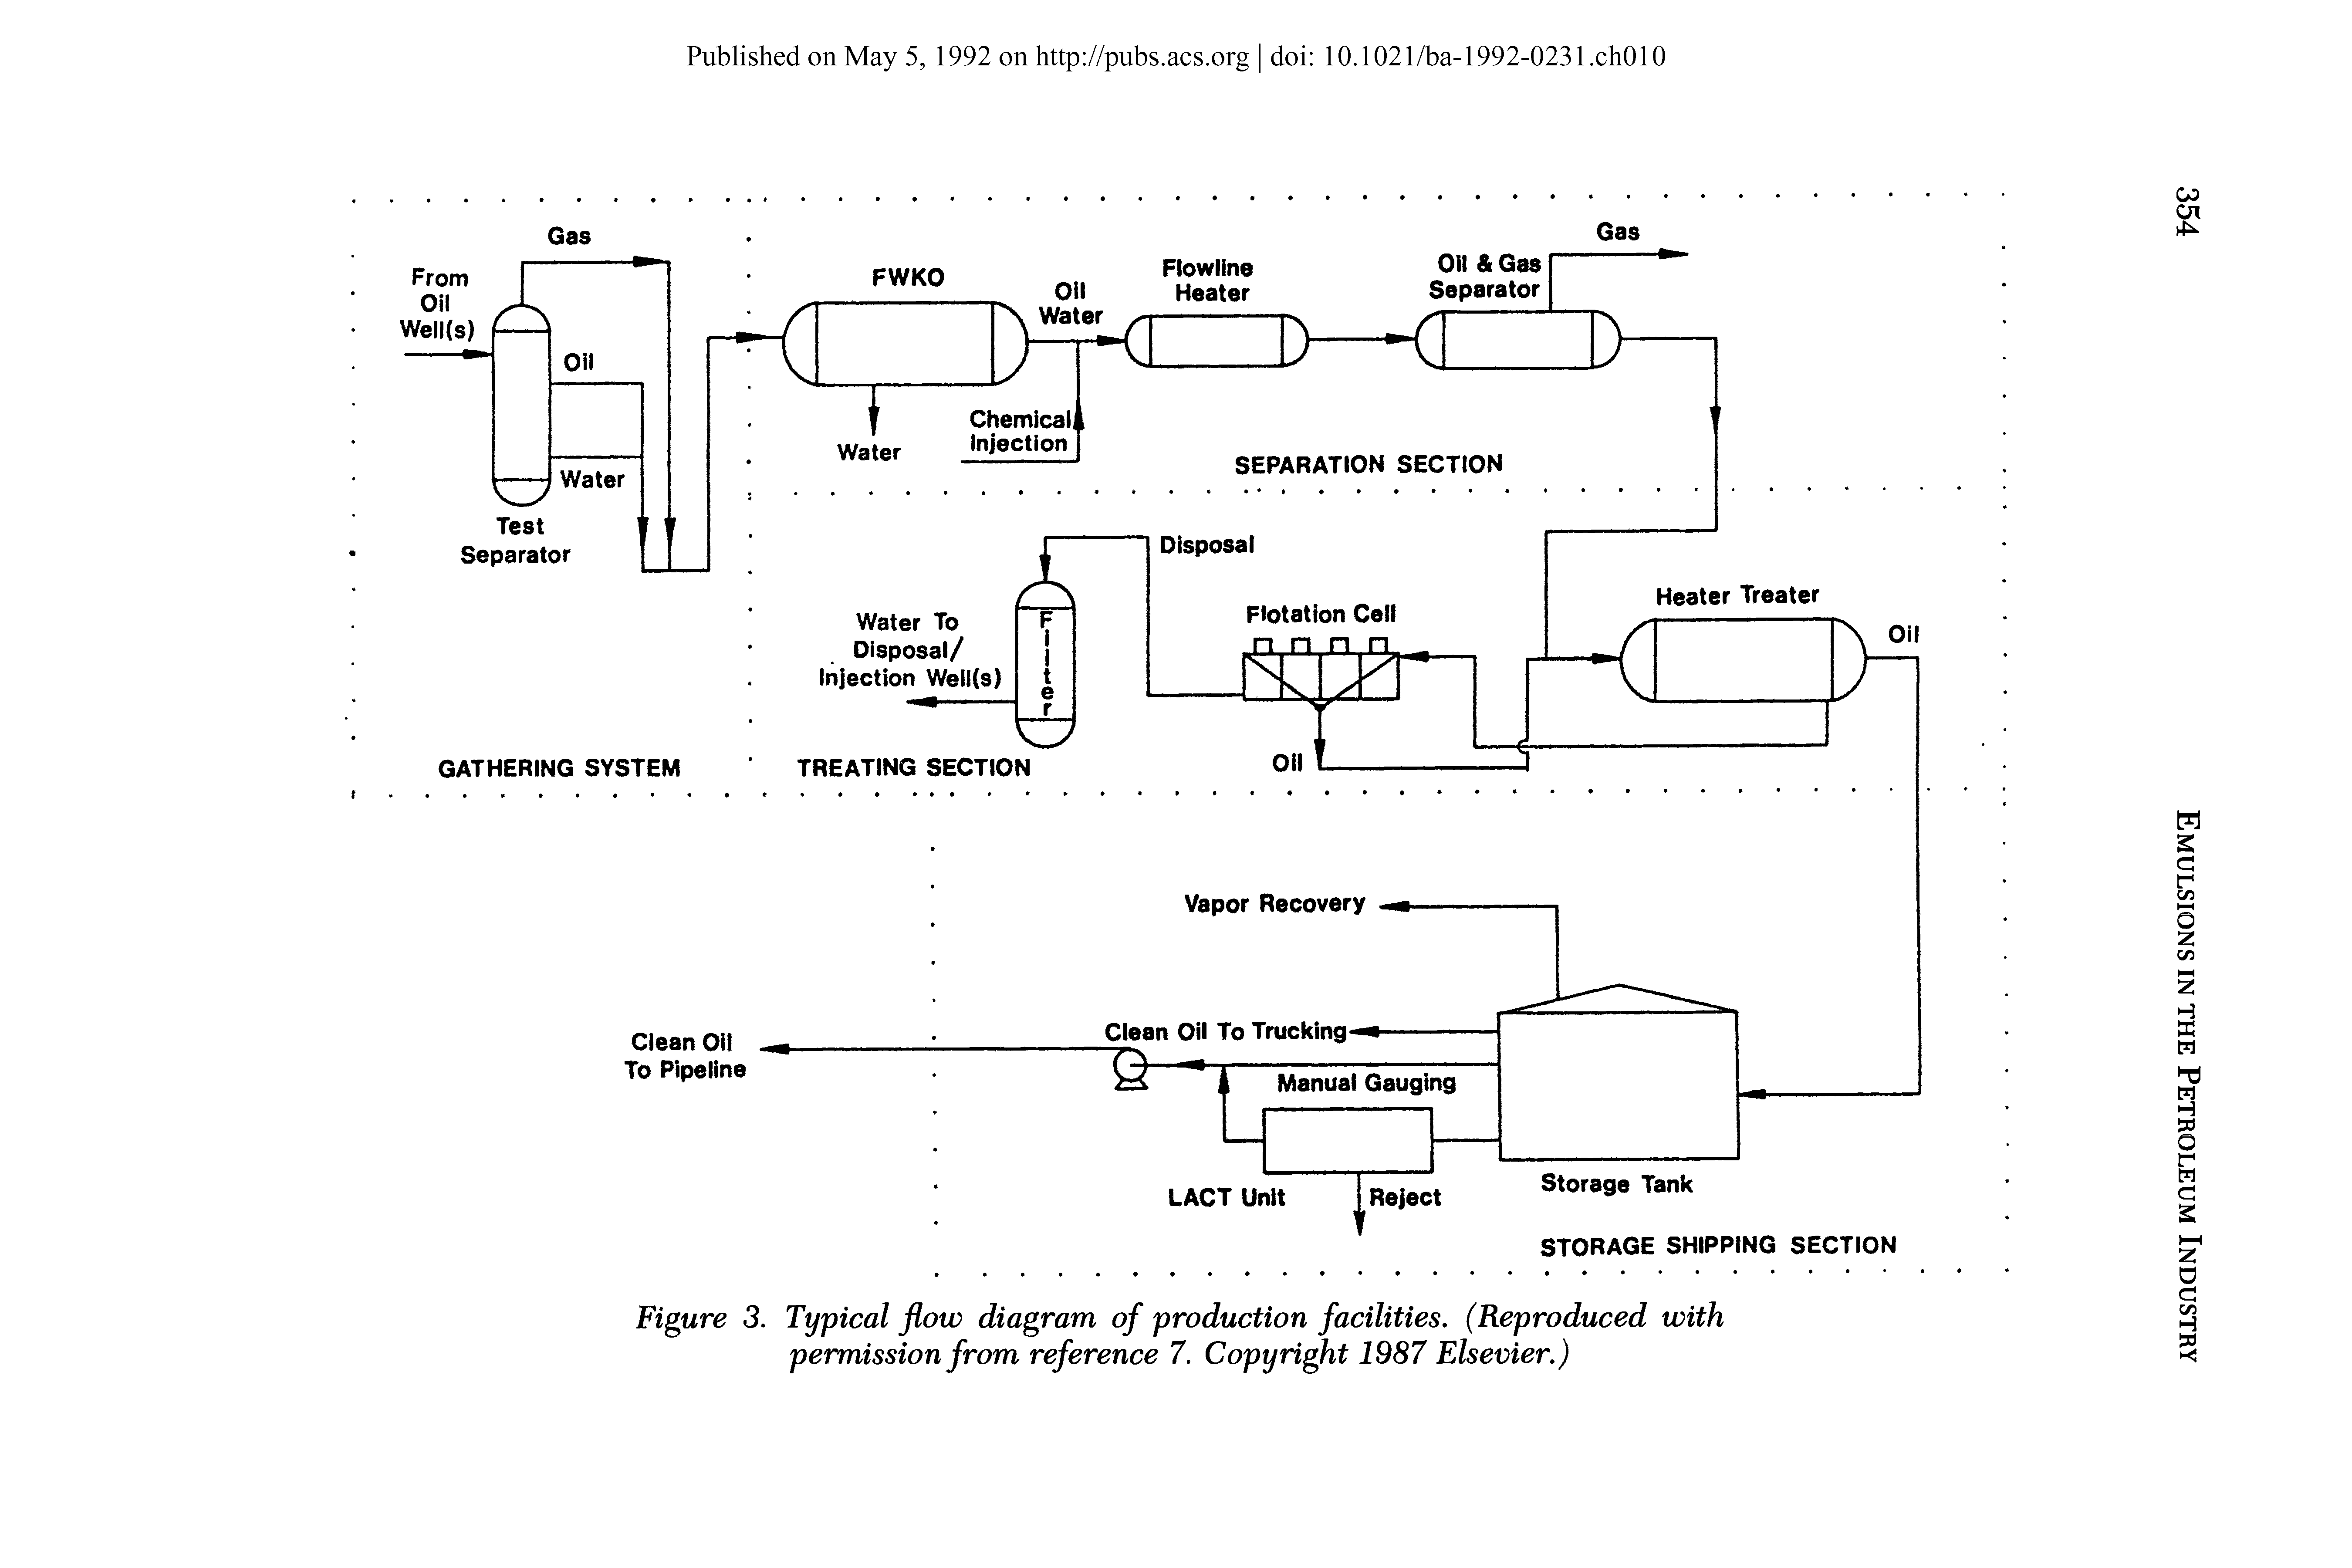 Figure 3. Typical flow diagram of production facilities. (Reproduced with permission from reference 7. Copy right 1987 Elsevier.)...